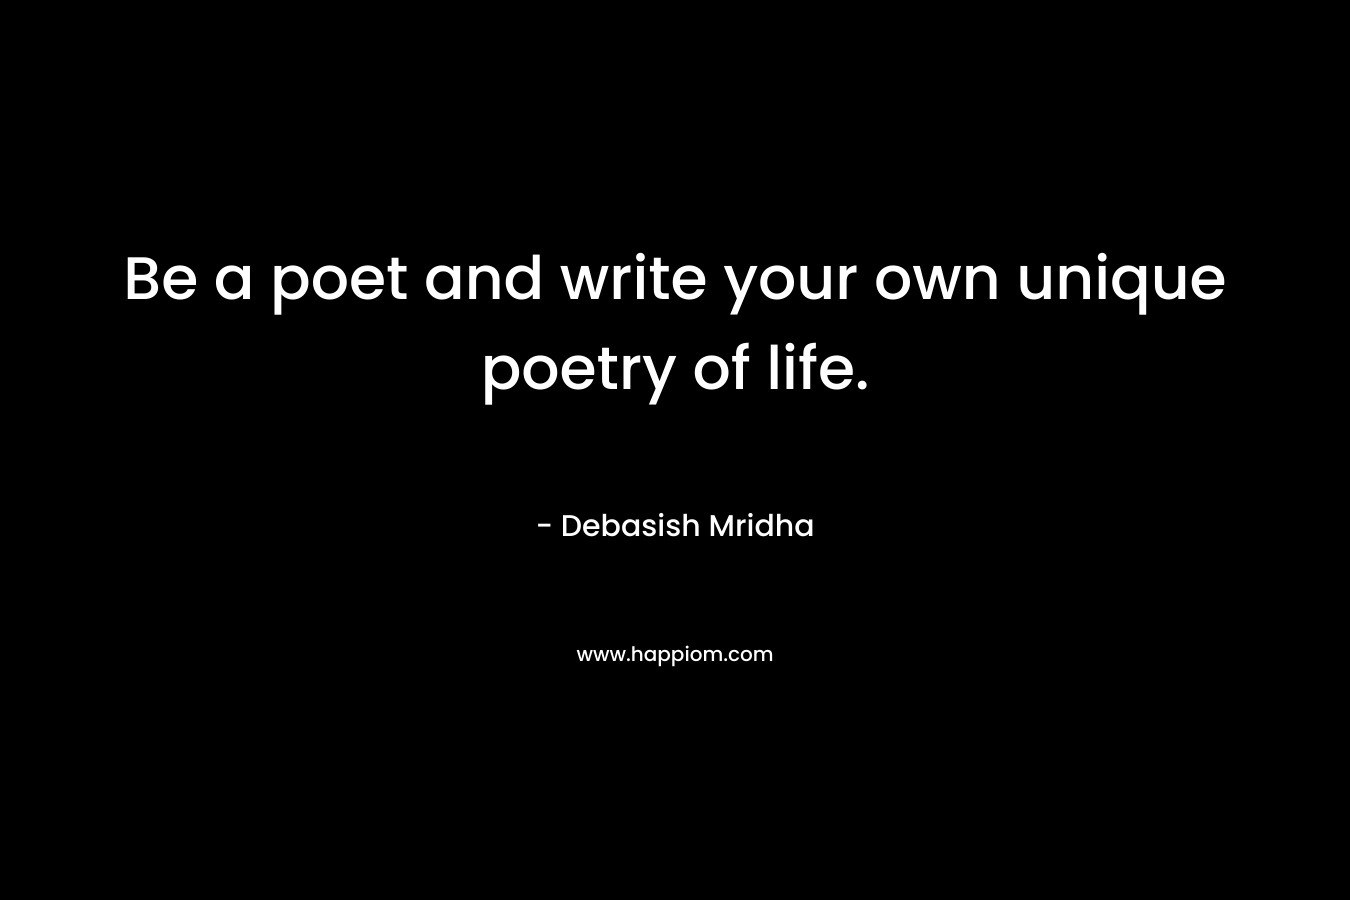 Be a poet and write your own unique poetry of life.